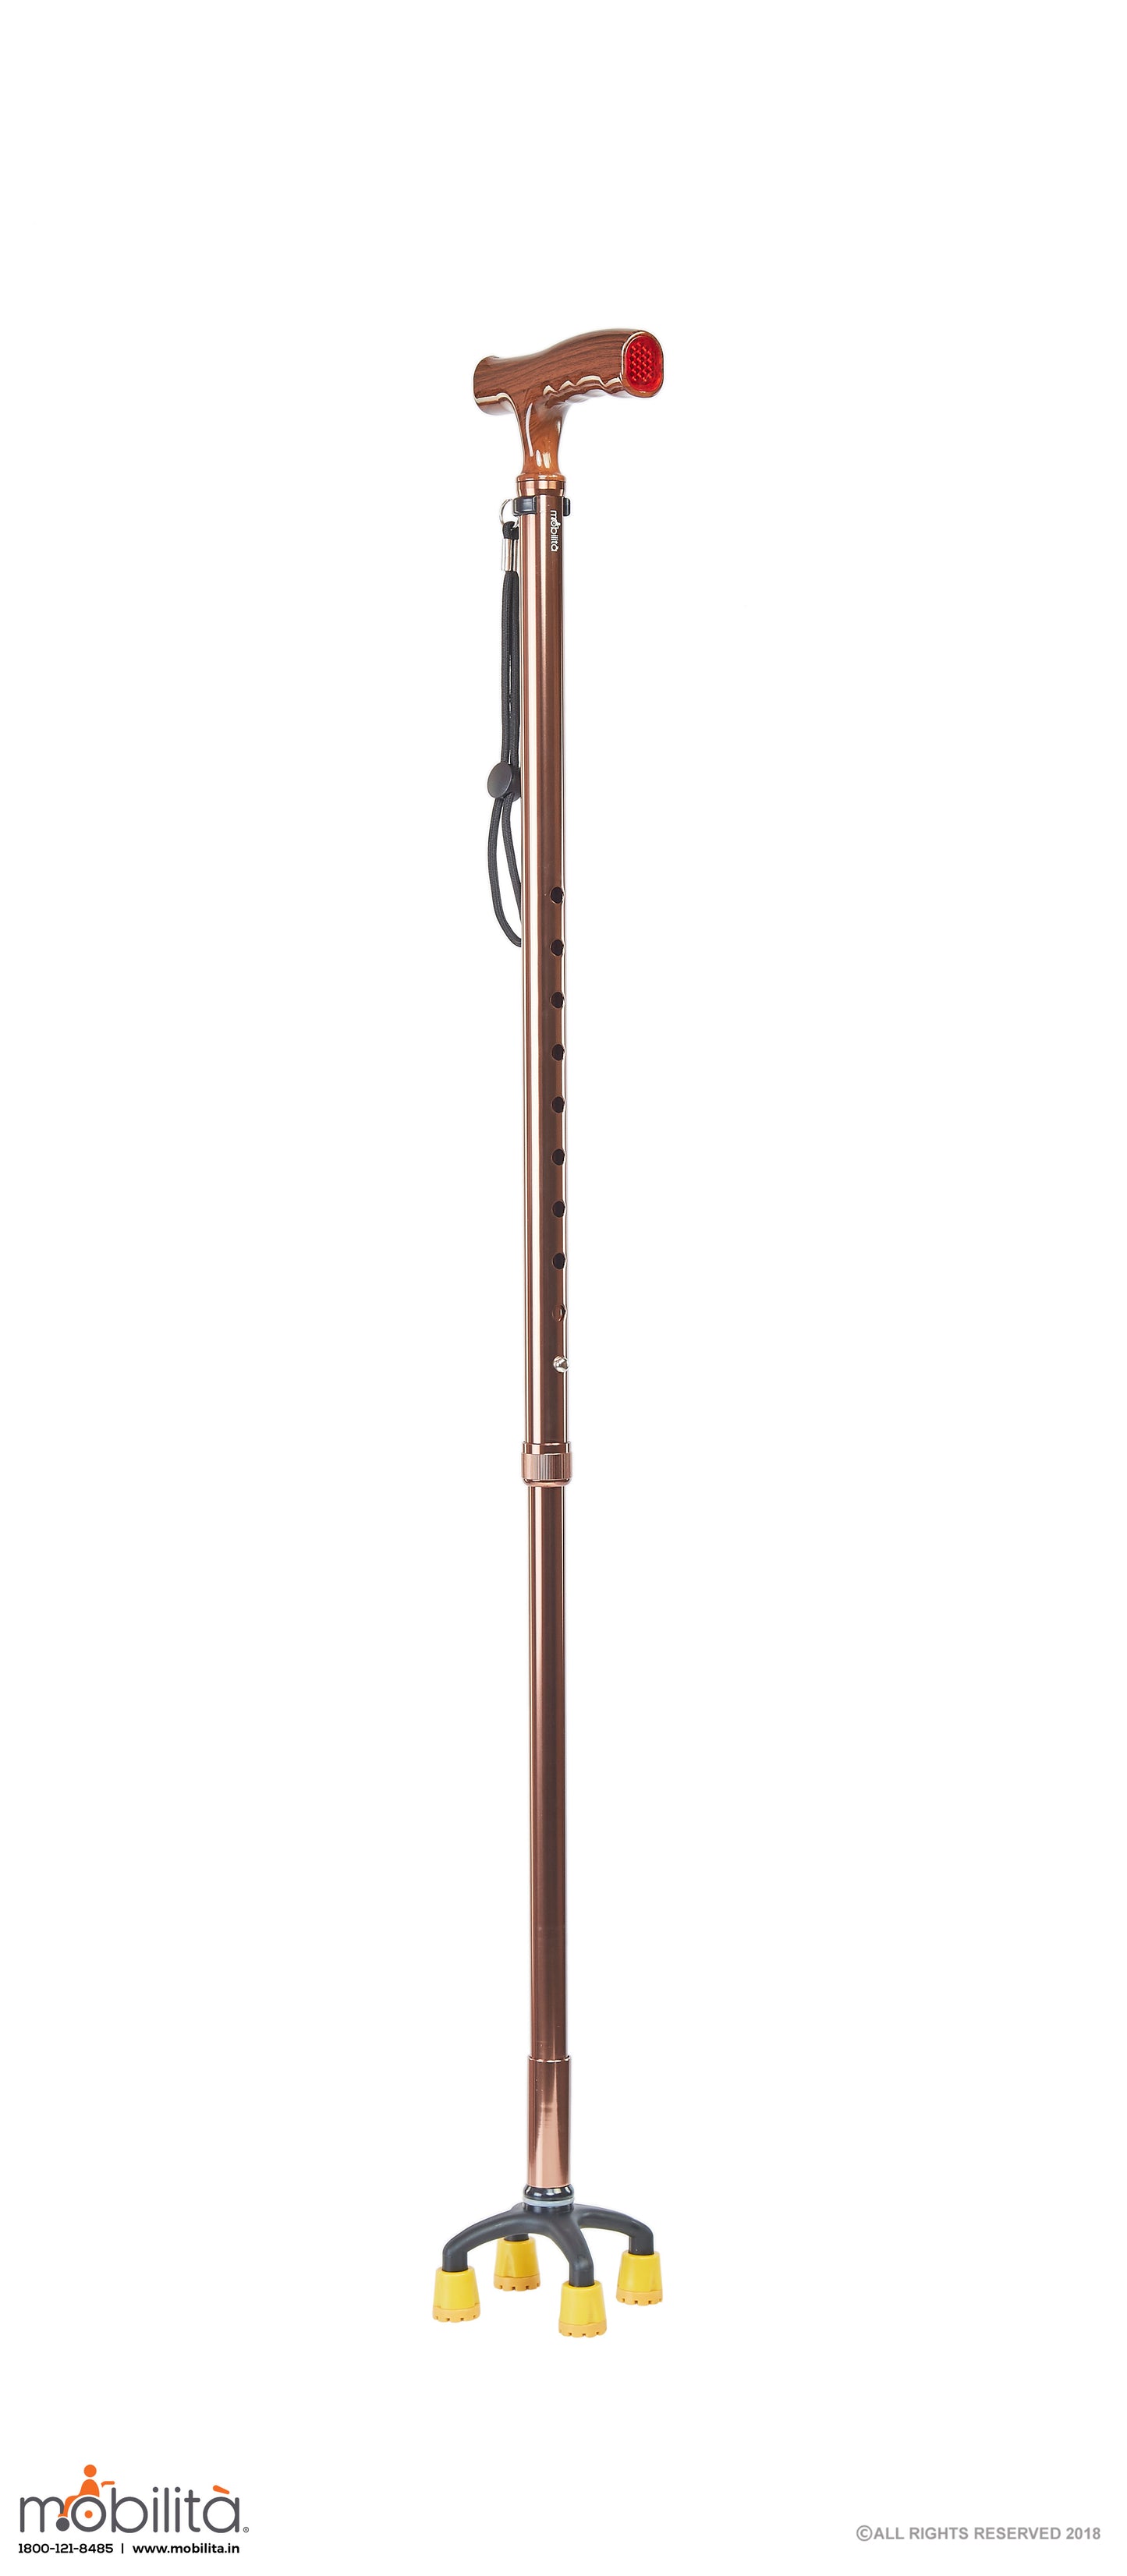 M 705 - Walking Cane - Square Paw - Straight Shank - Champagne Brown